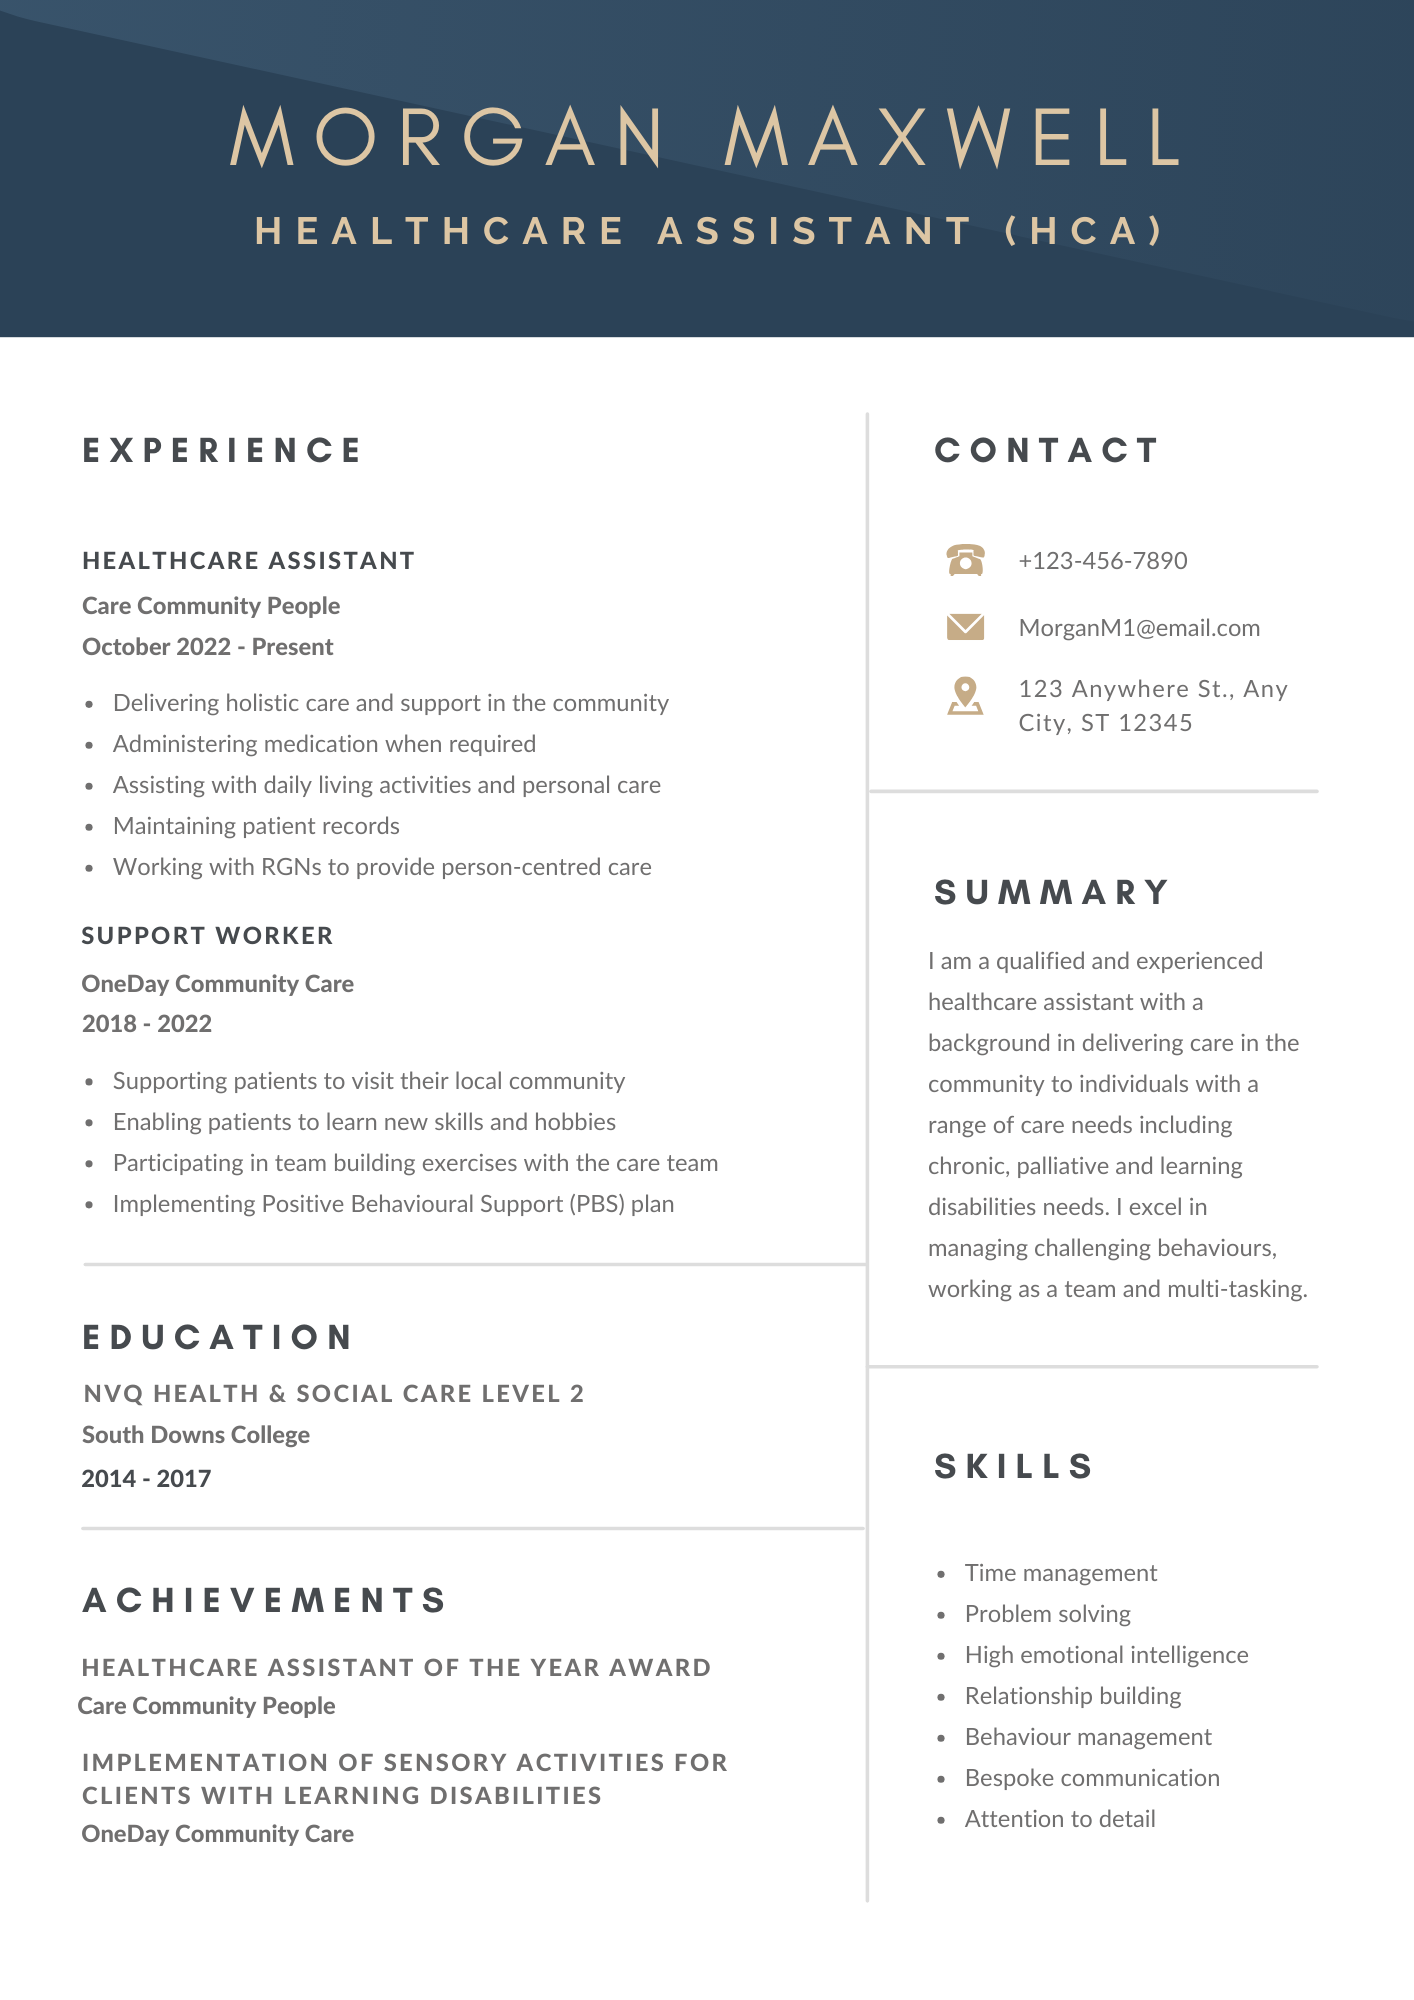 Healthcare assistant CV example